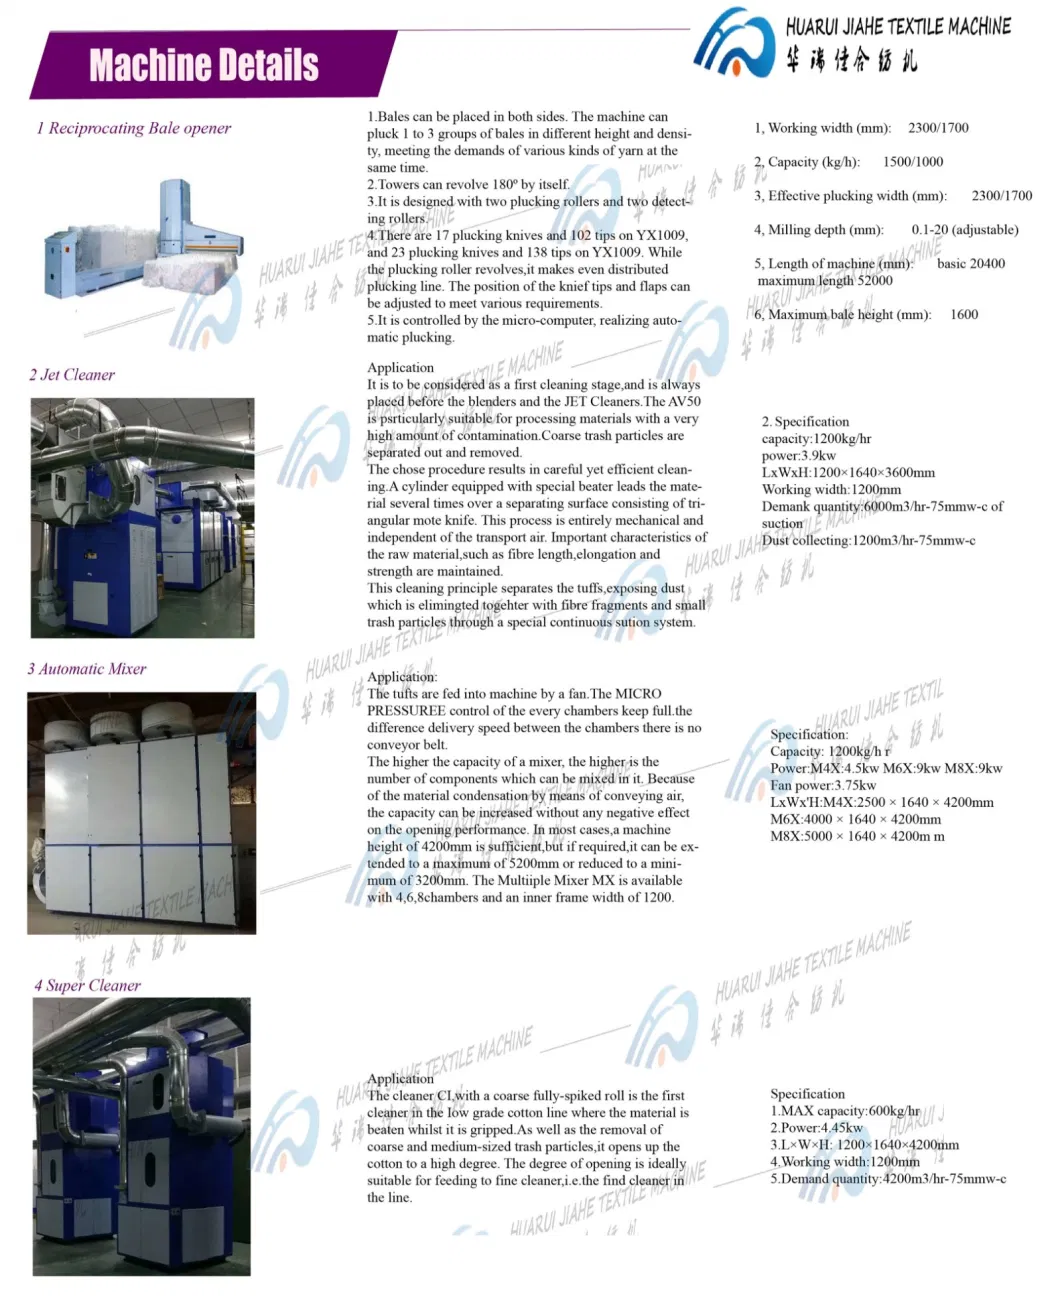 Hank Reeling Machine Polyester PP Silk Cotton Space Dyeing Yarn Line with Two-for-One Twister for Short Fiber/ Two for One Twisting Machine for Short Fiber